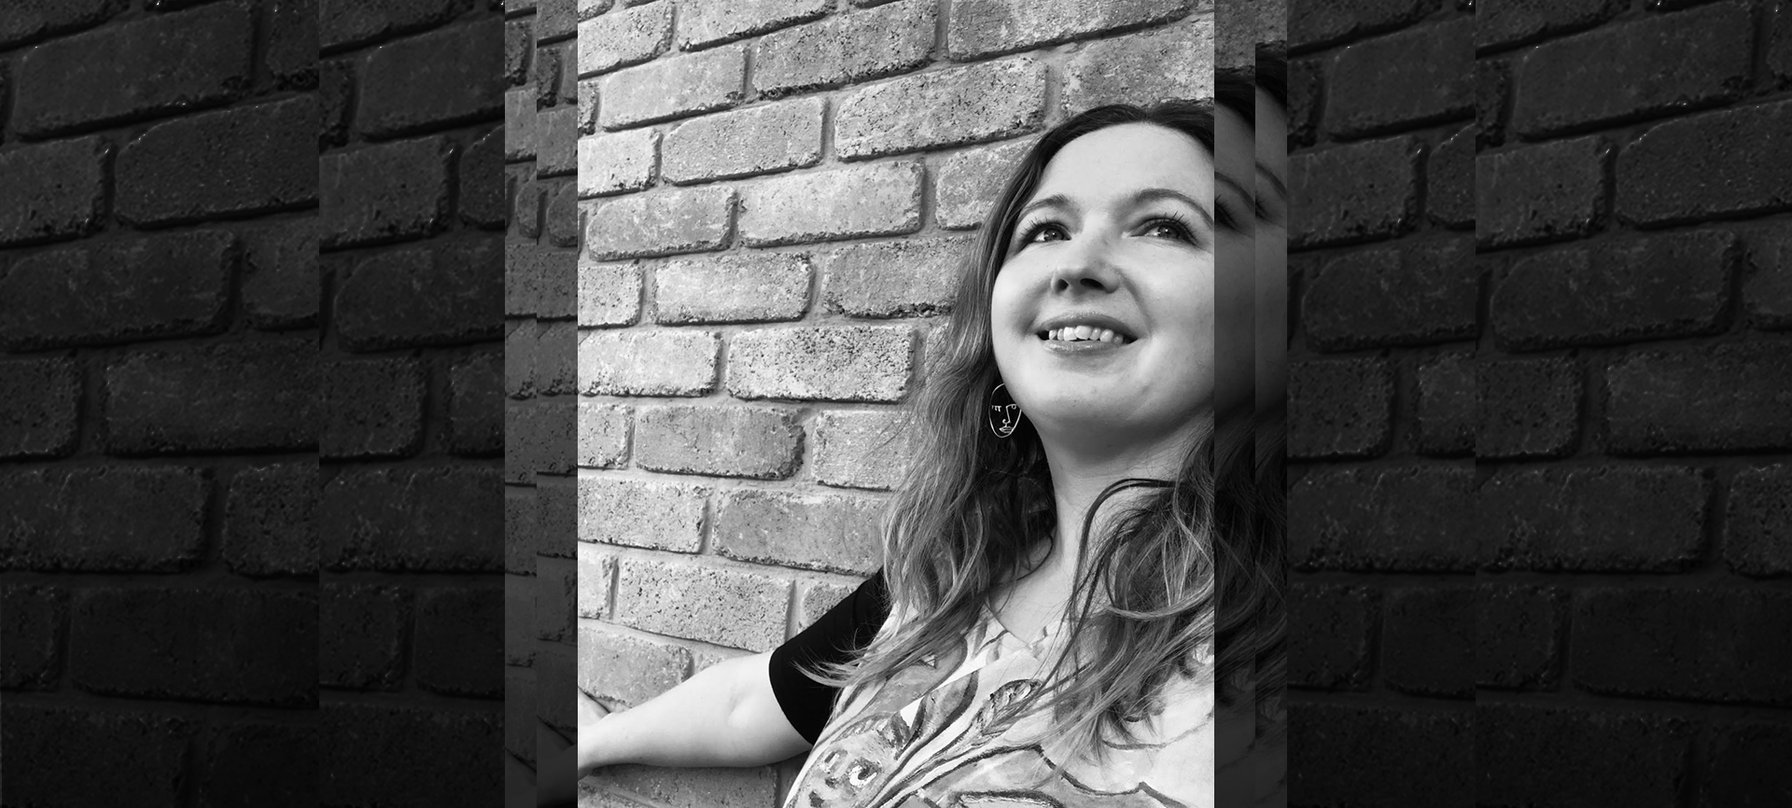 A black and white photo of Hayley Strutt smiling with her back against a brick wall. Hayley has pale skin and long brown hair. Credit Hayley Strutt.